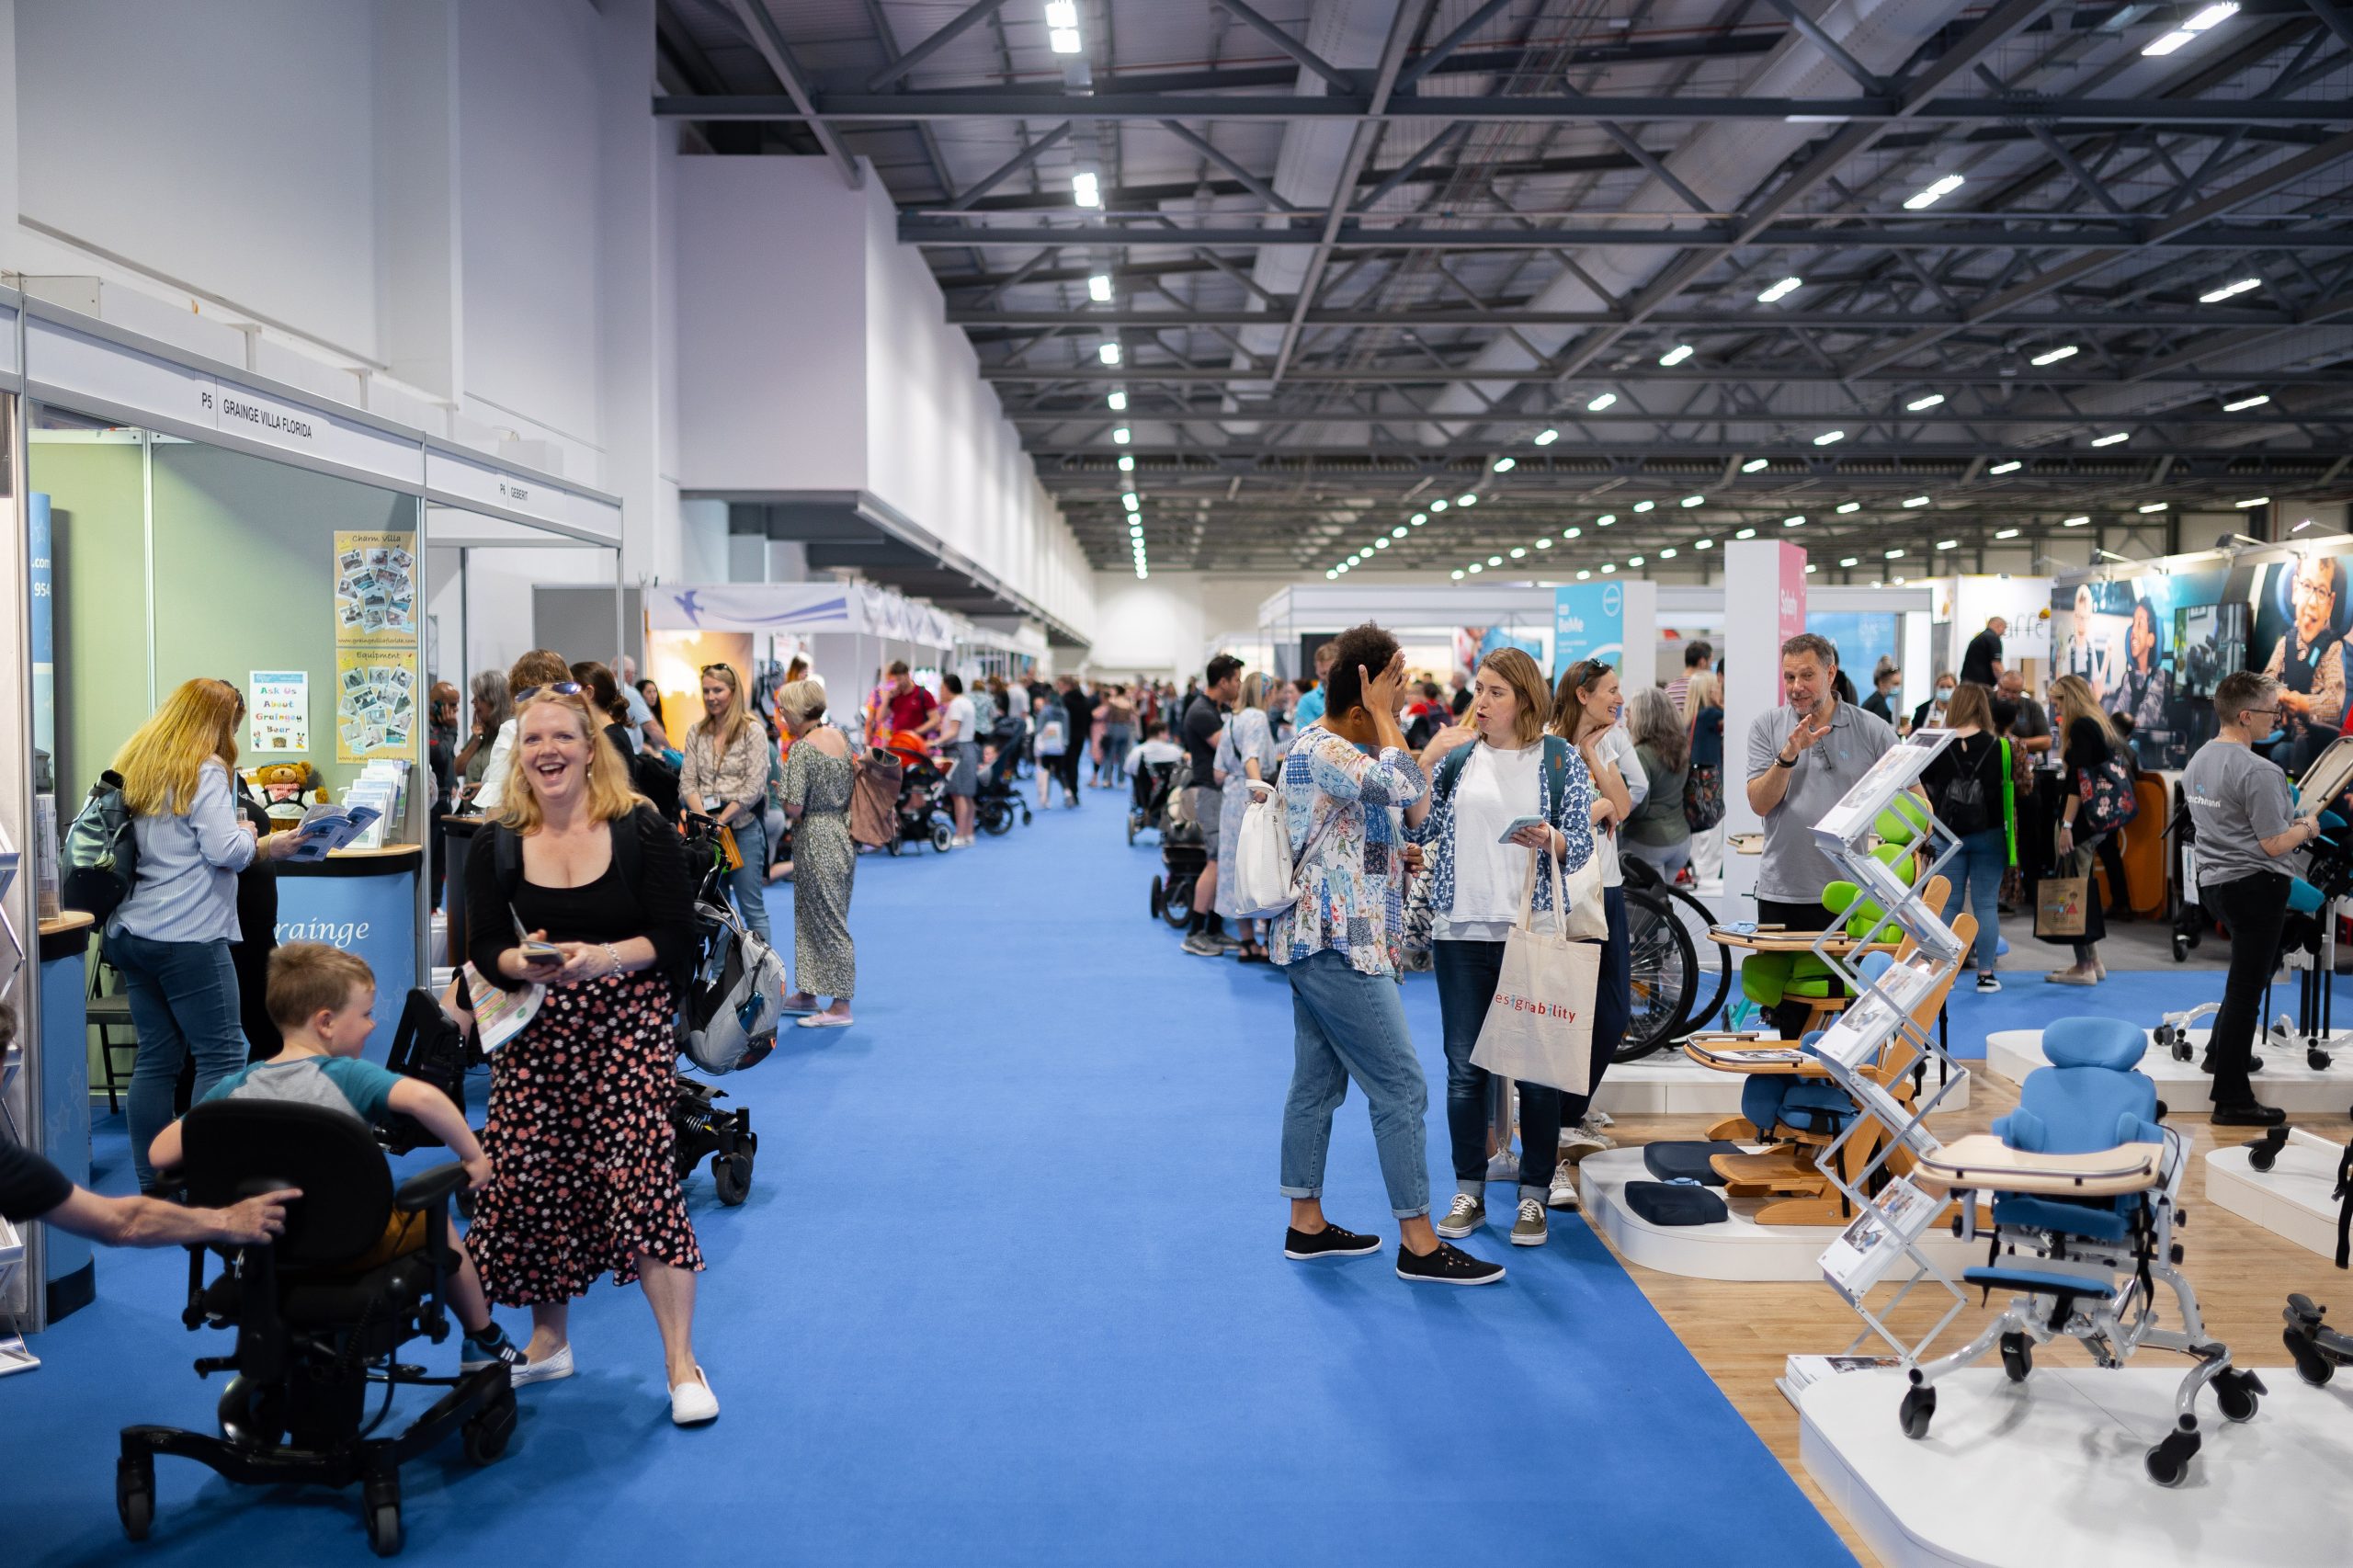 Busy venue space showing visitors discovering different exhibitors